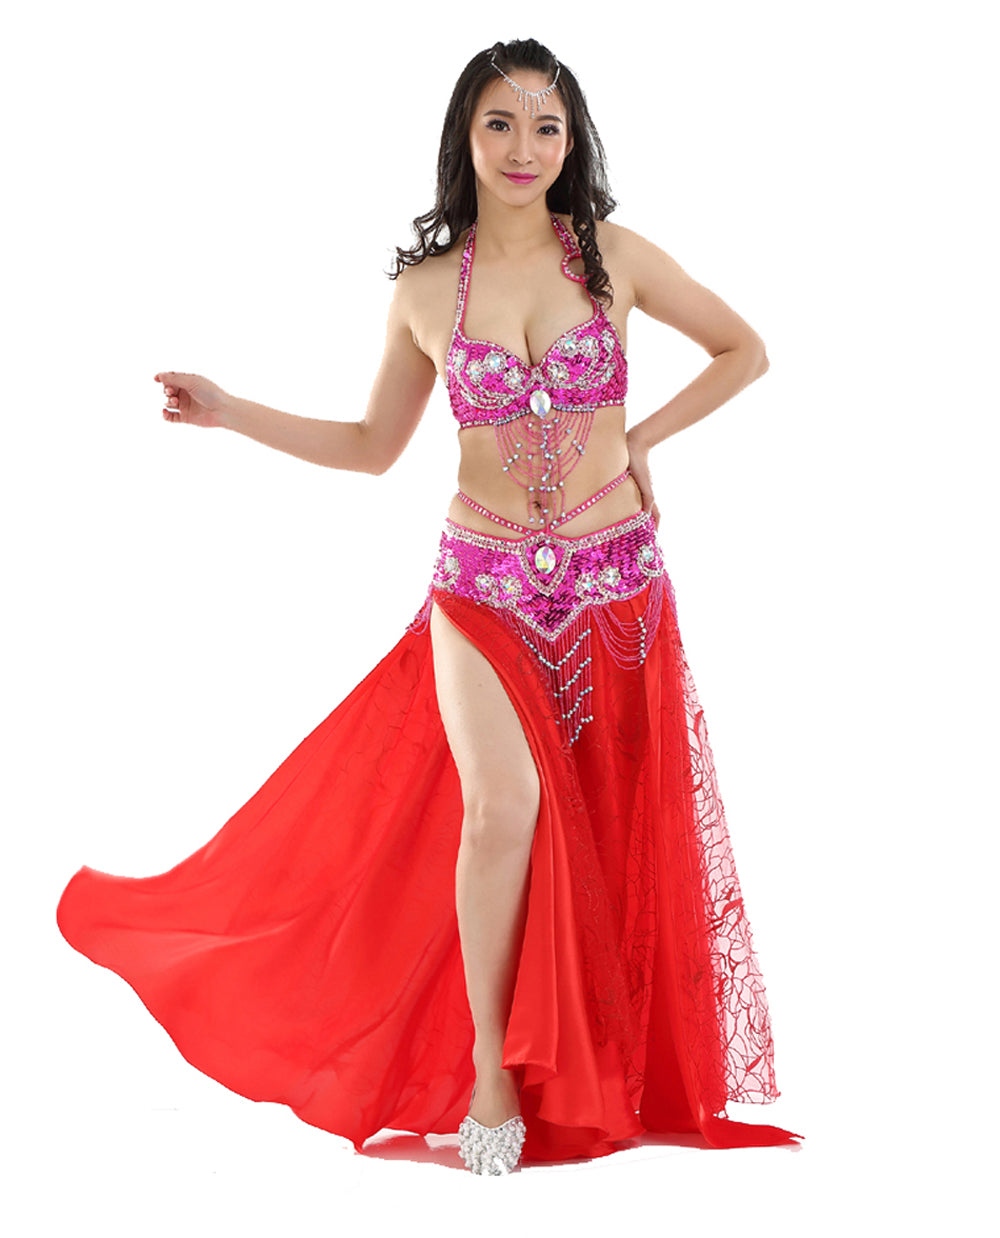 Belly Dance Bra Factory, Belly Dance Bra Factory Manufacturers & Suppliers